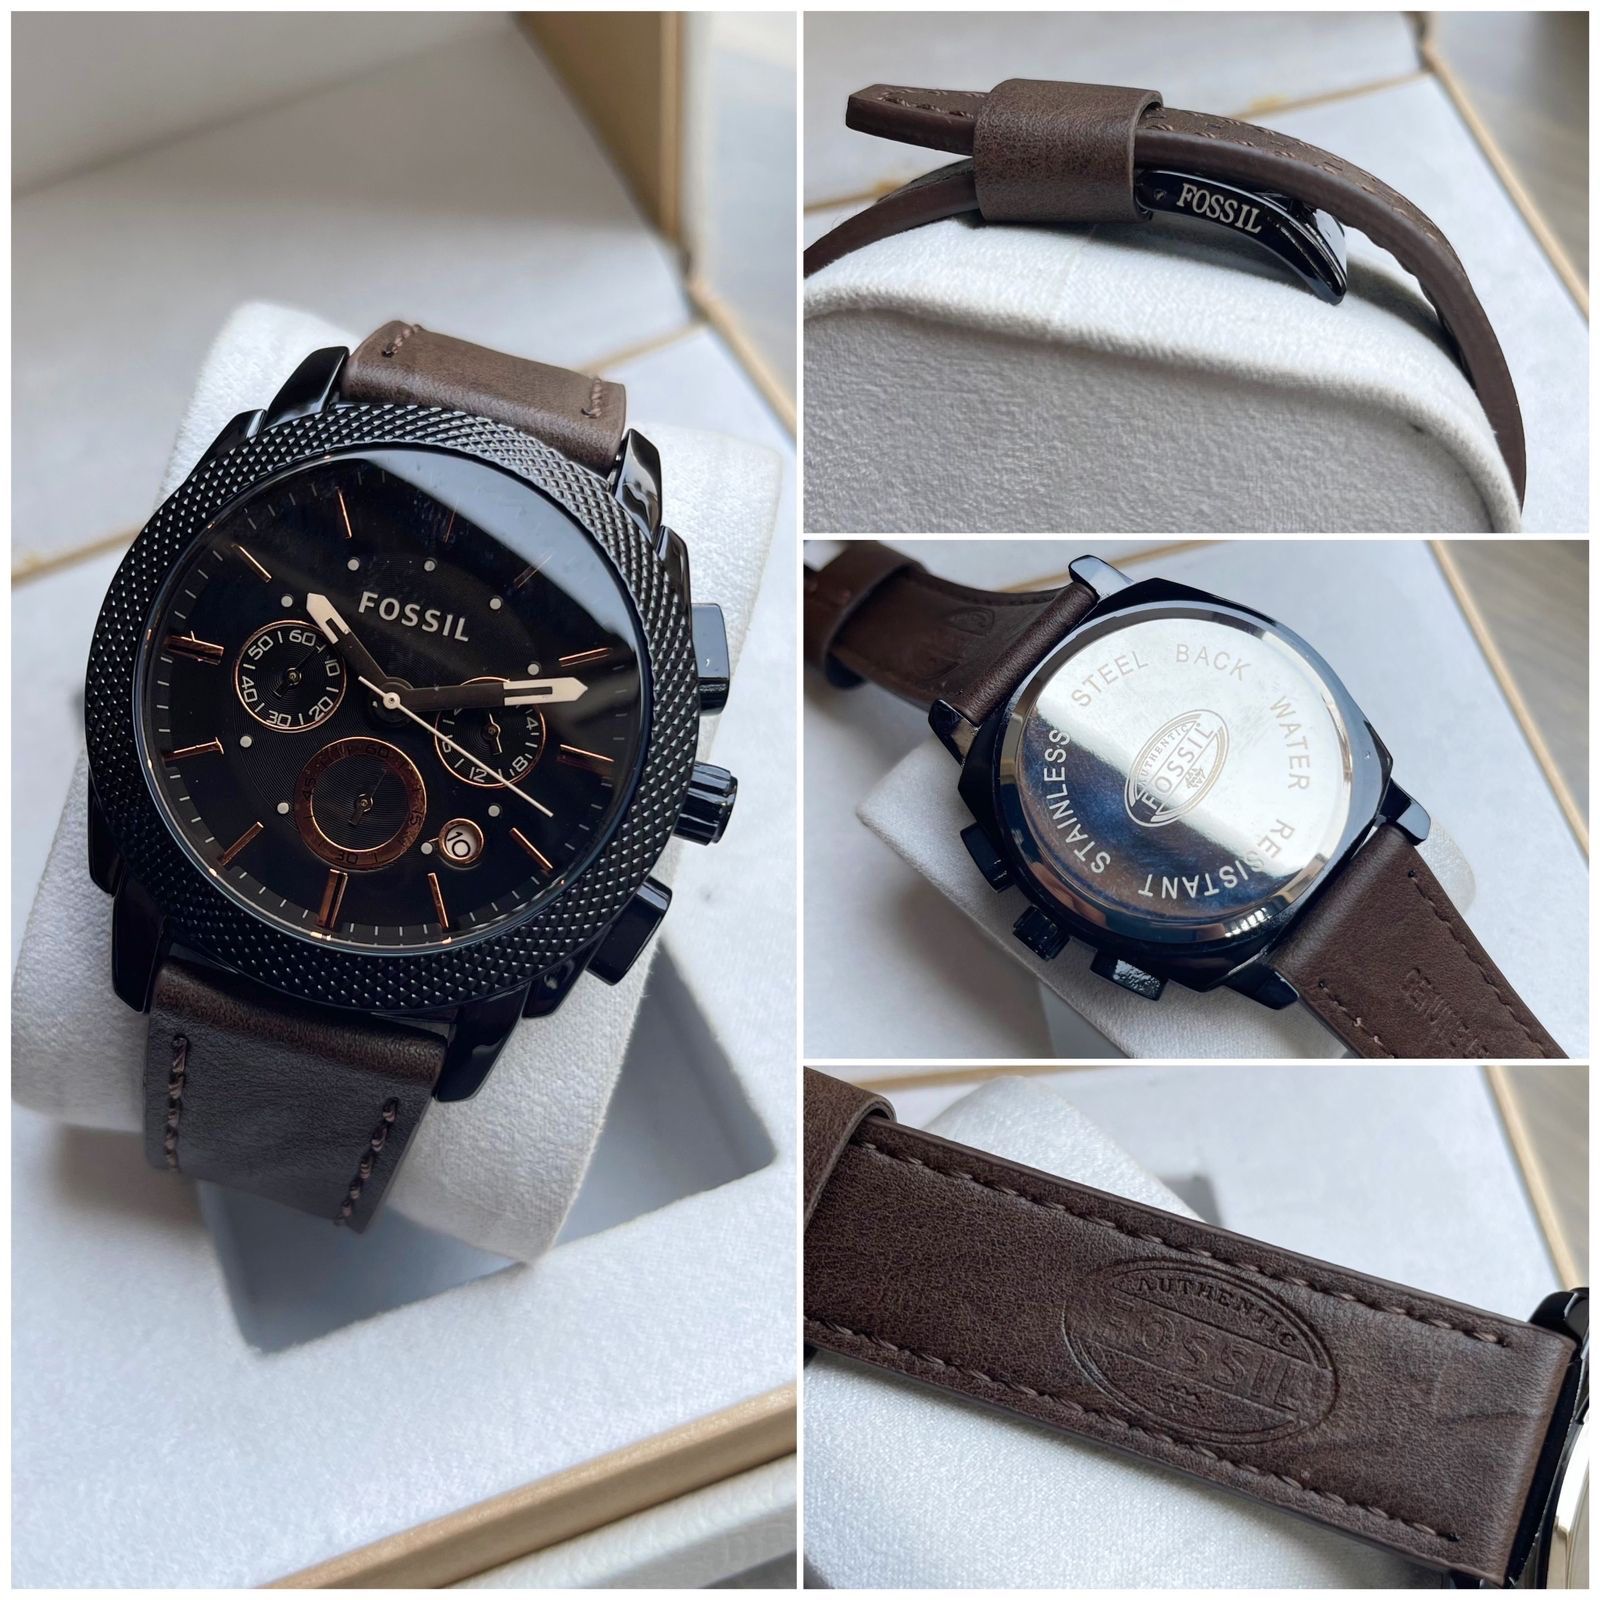 Fossil FS 4656 brown leather strap | Yas store